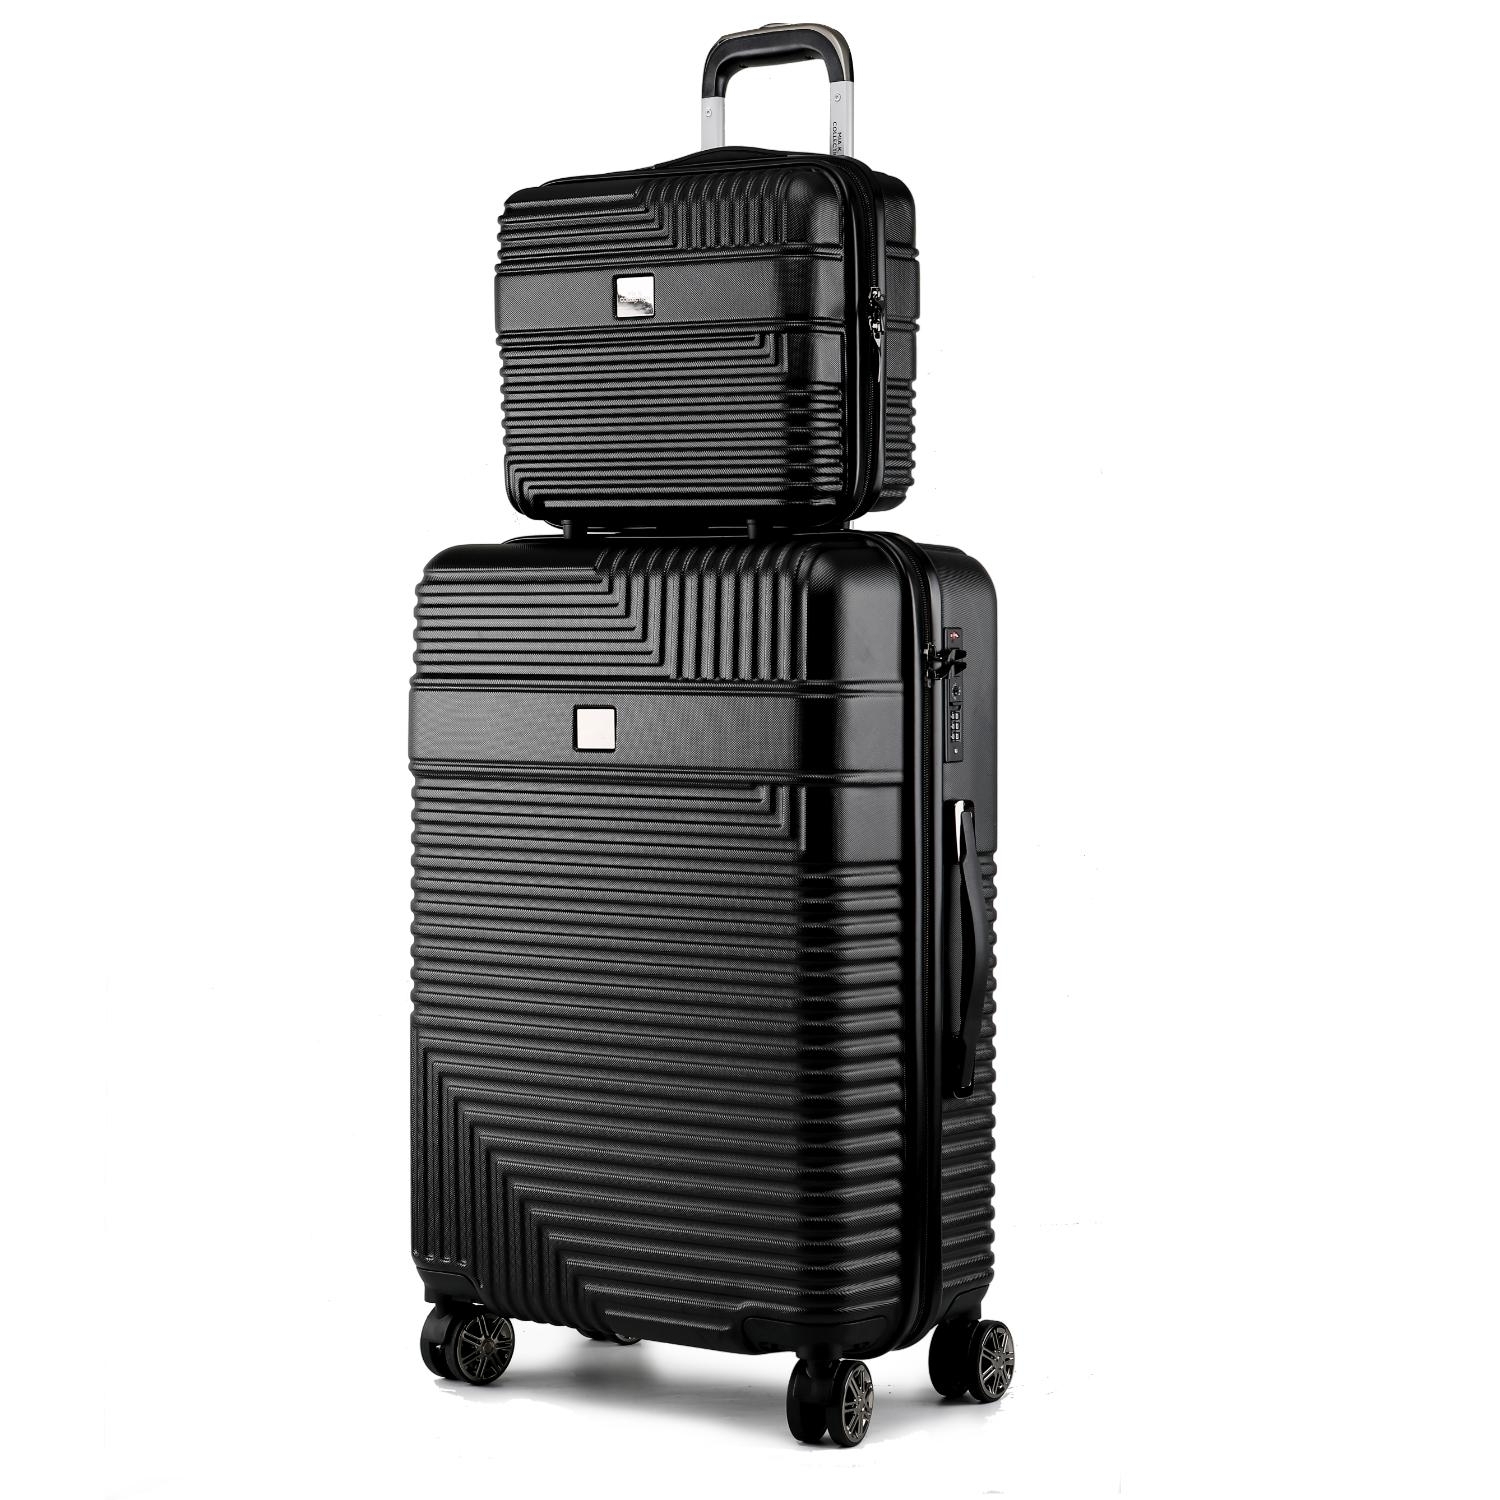 MKF Collection Mykonos Luggage Set With A Medium Carry-on And Small Cosmetic Case 2 Pieces By Mia K - Black